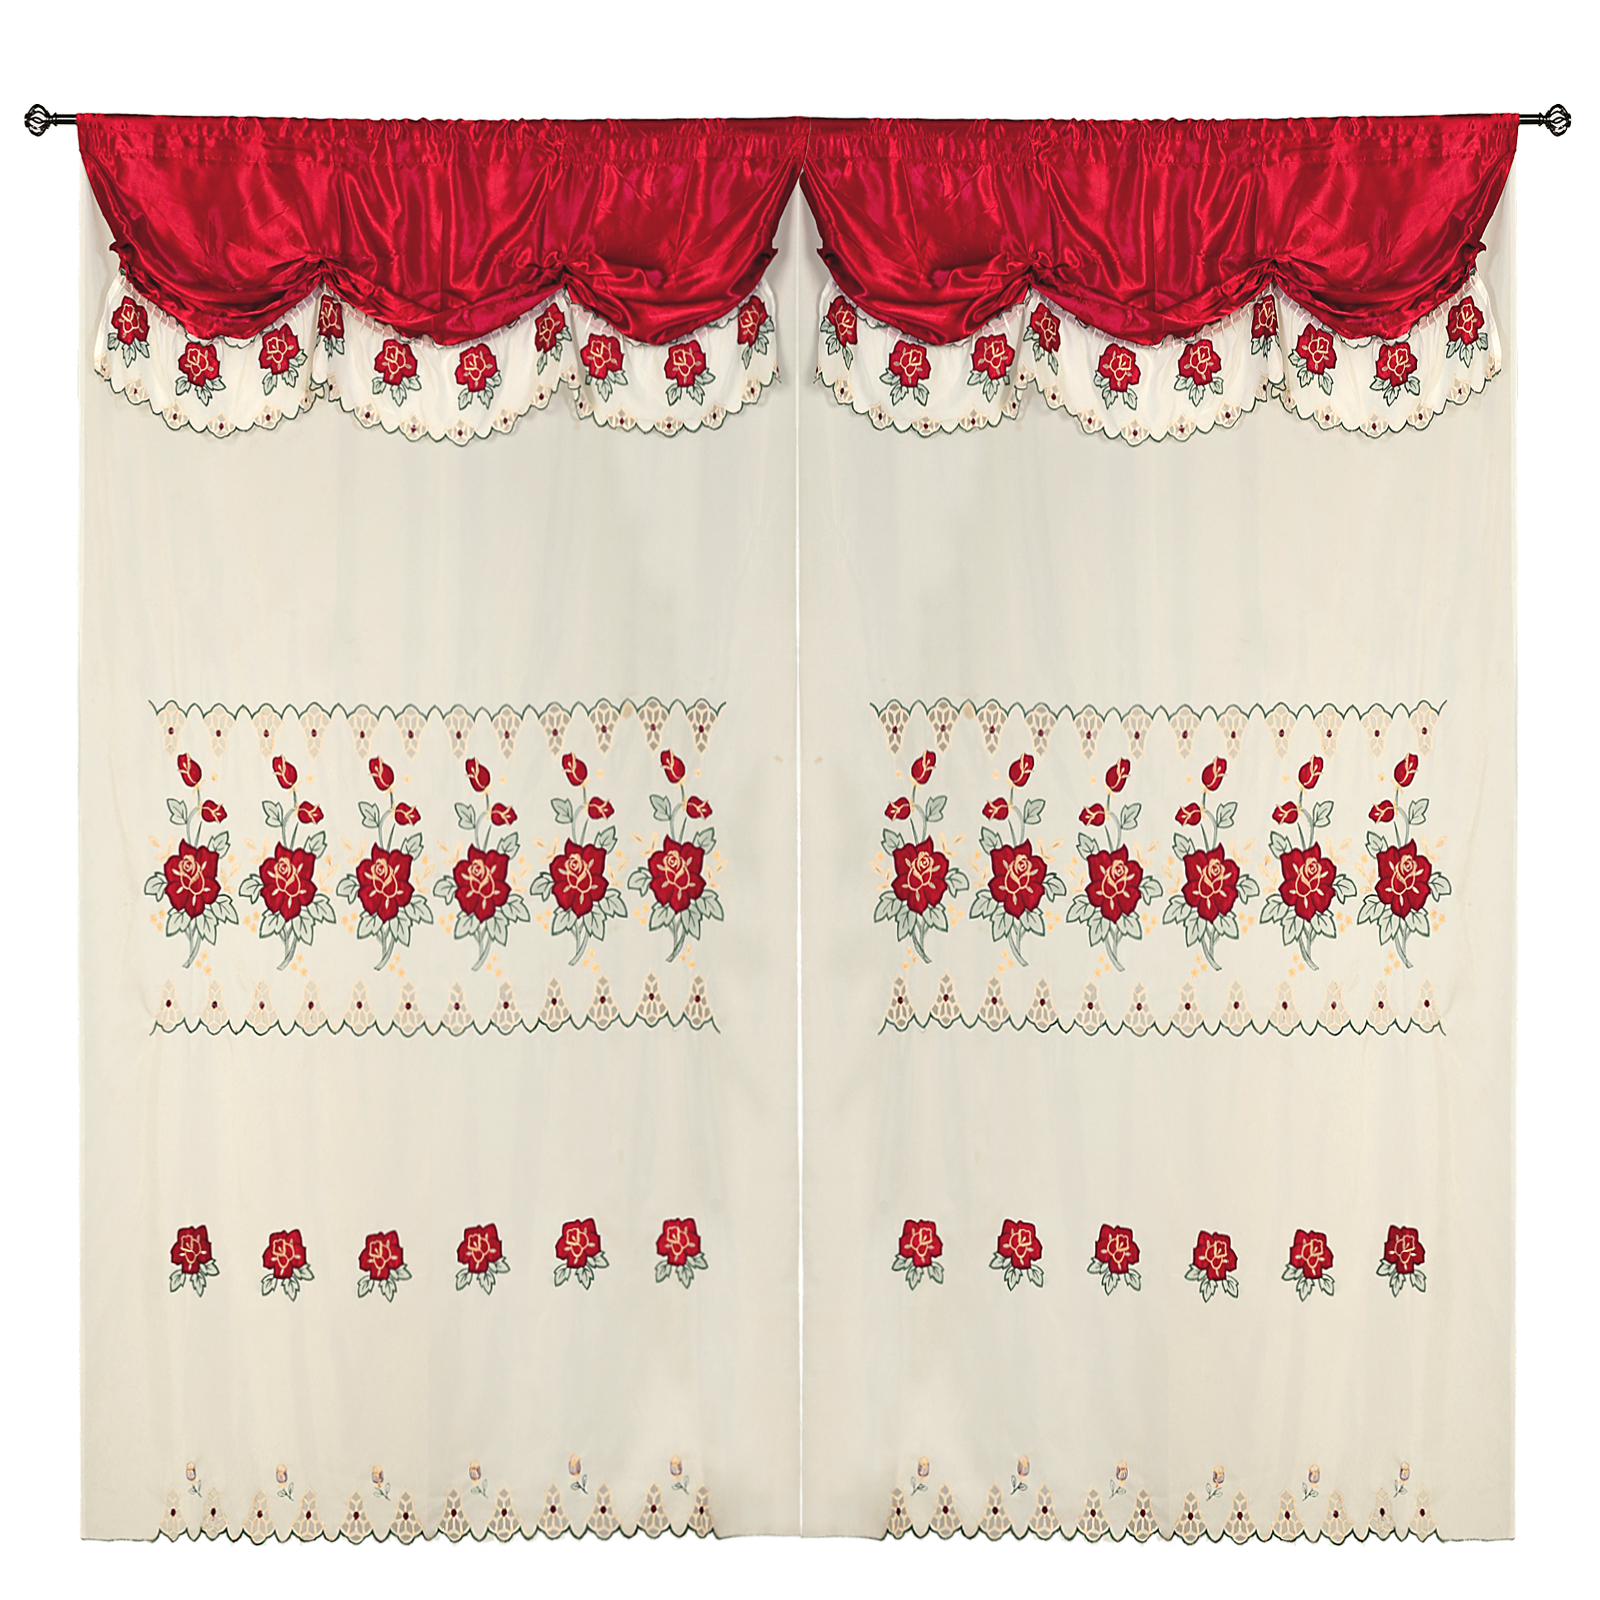 Details About Wine Red Room Decor Embroidery Sheer Valence Window Curtain Drapes 60x90 18